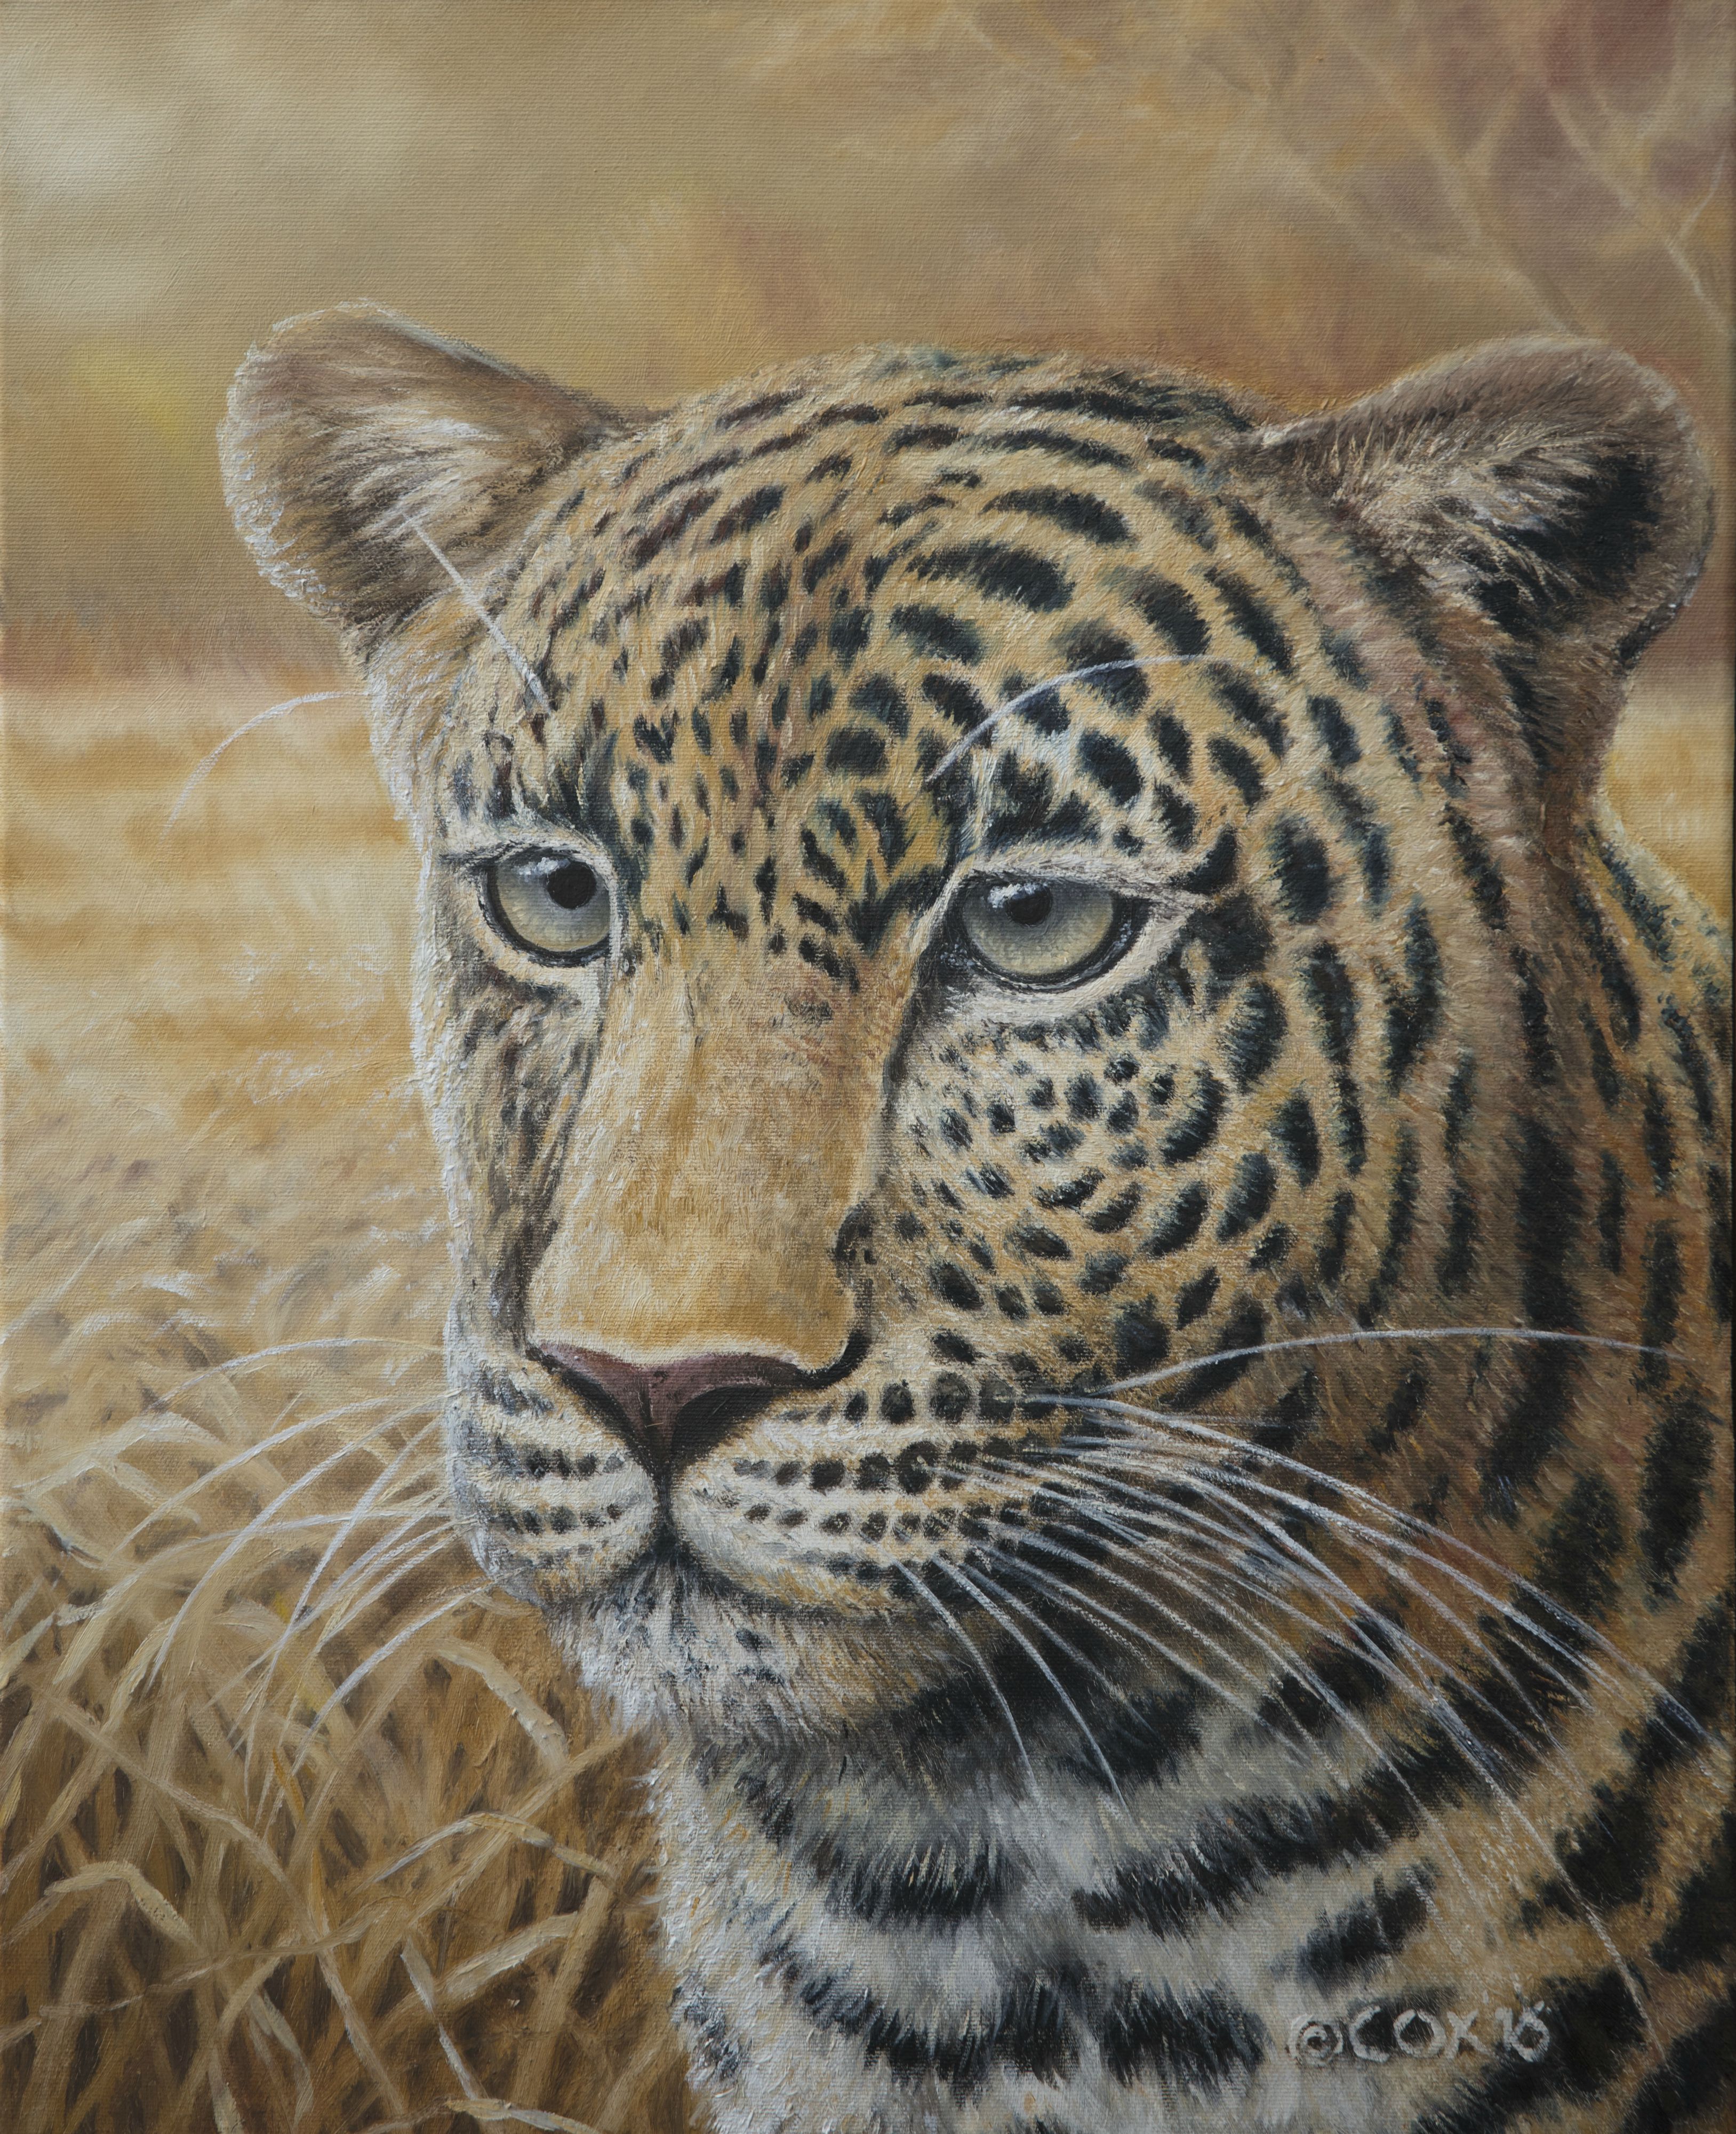 'Intentions' Leopard, Oil on canvas, 20x16"